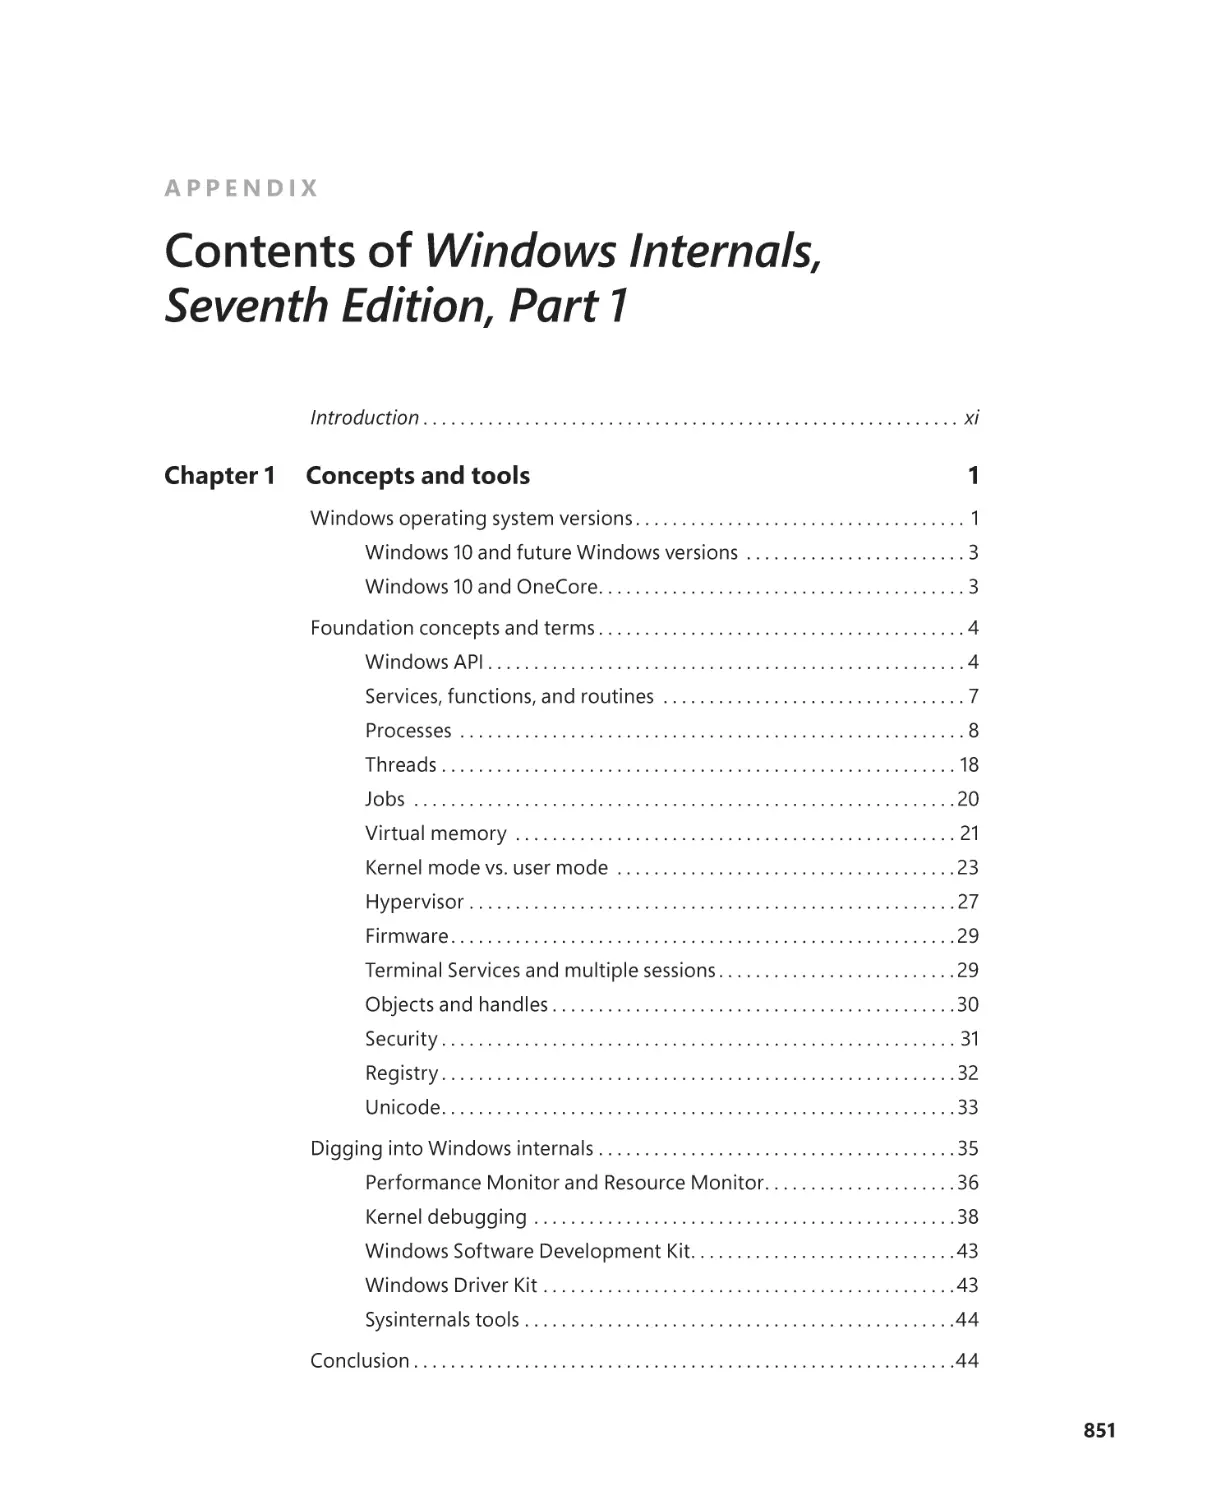 Contents of Windows Internals, Seventh Edition, Part 1